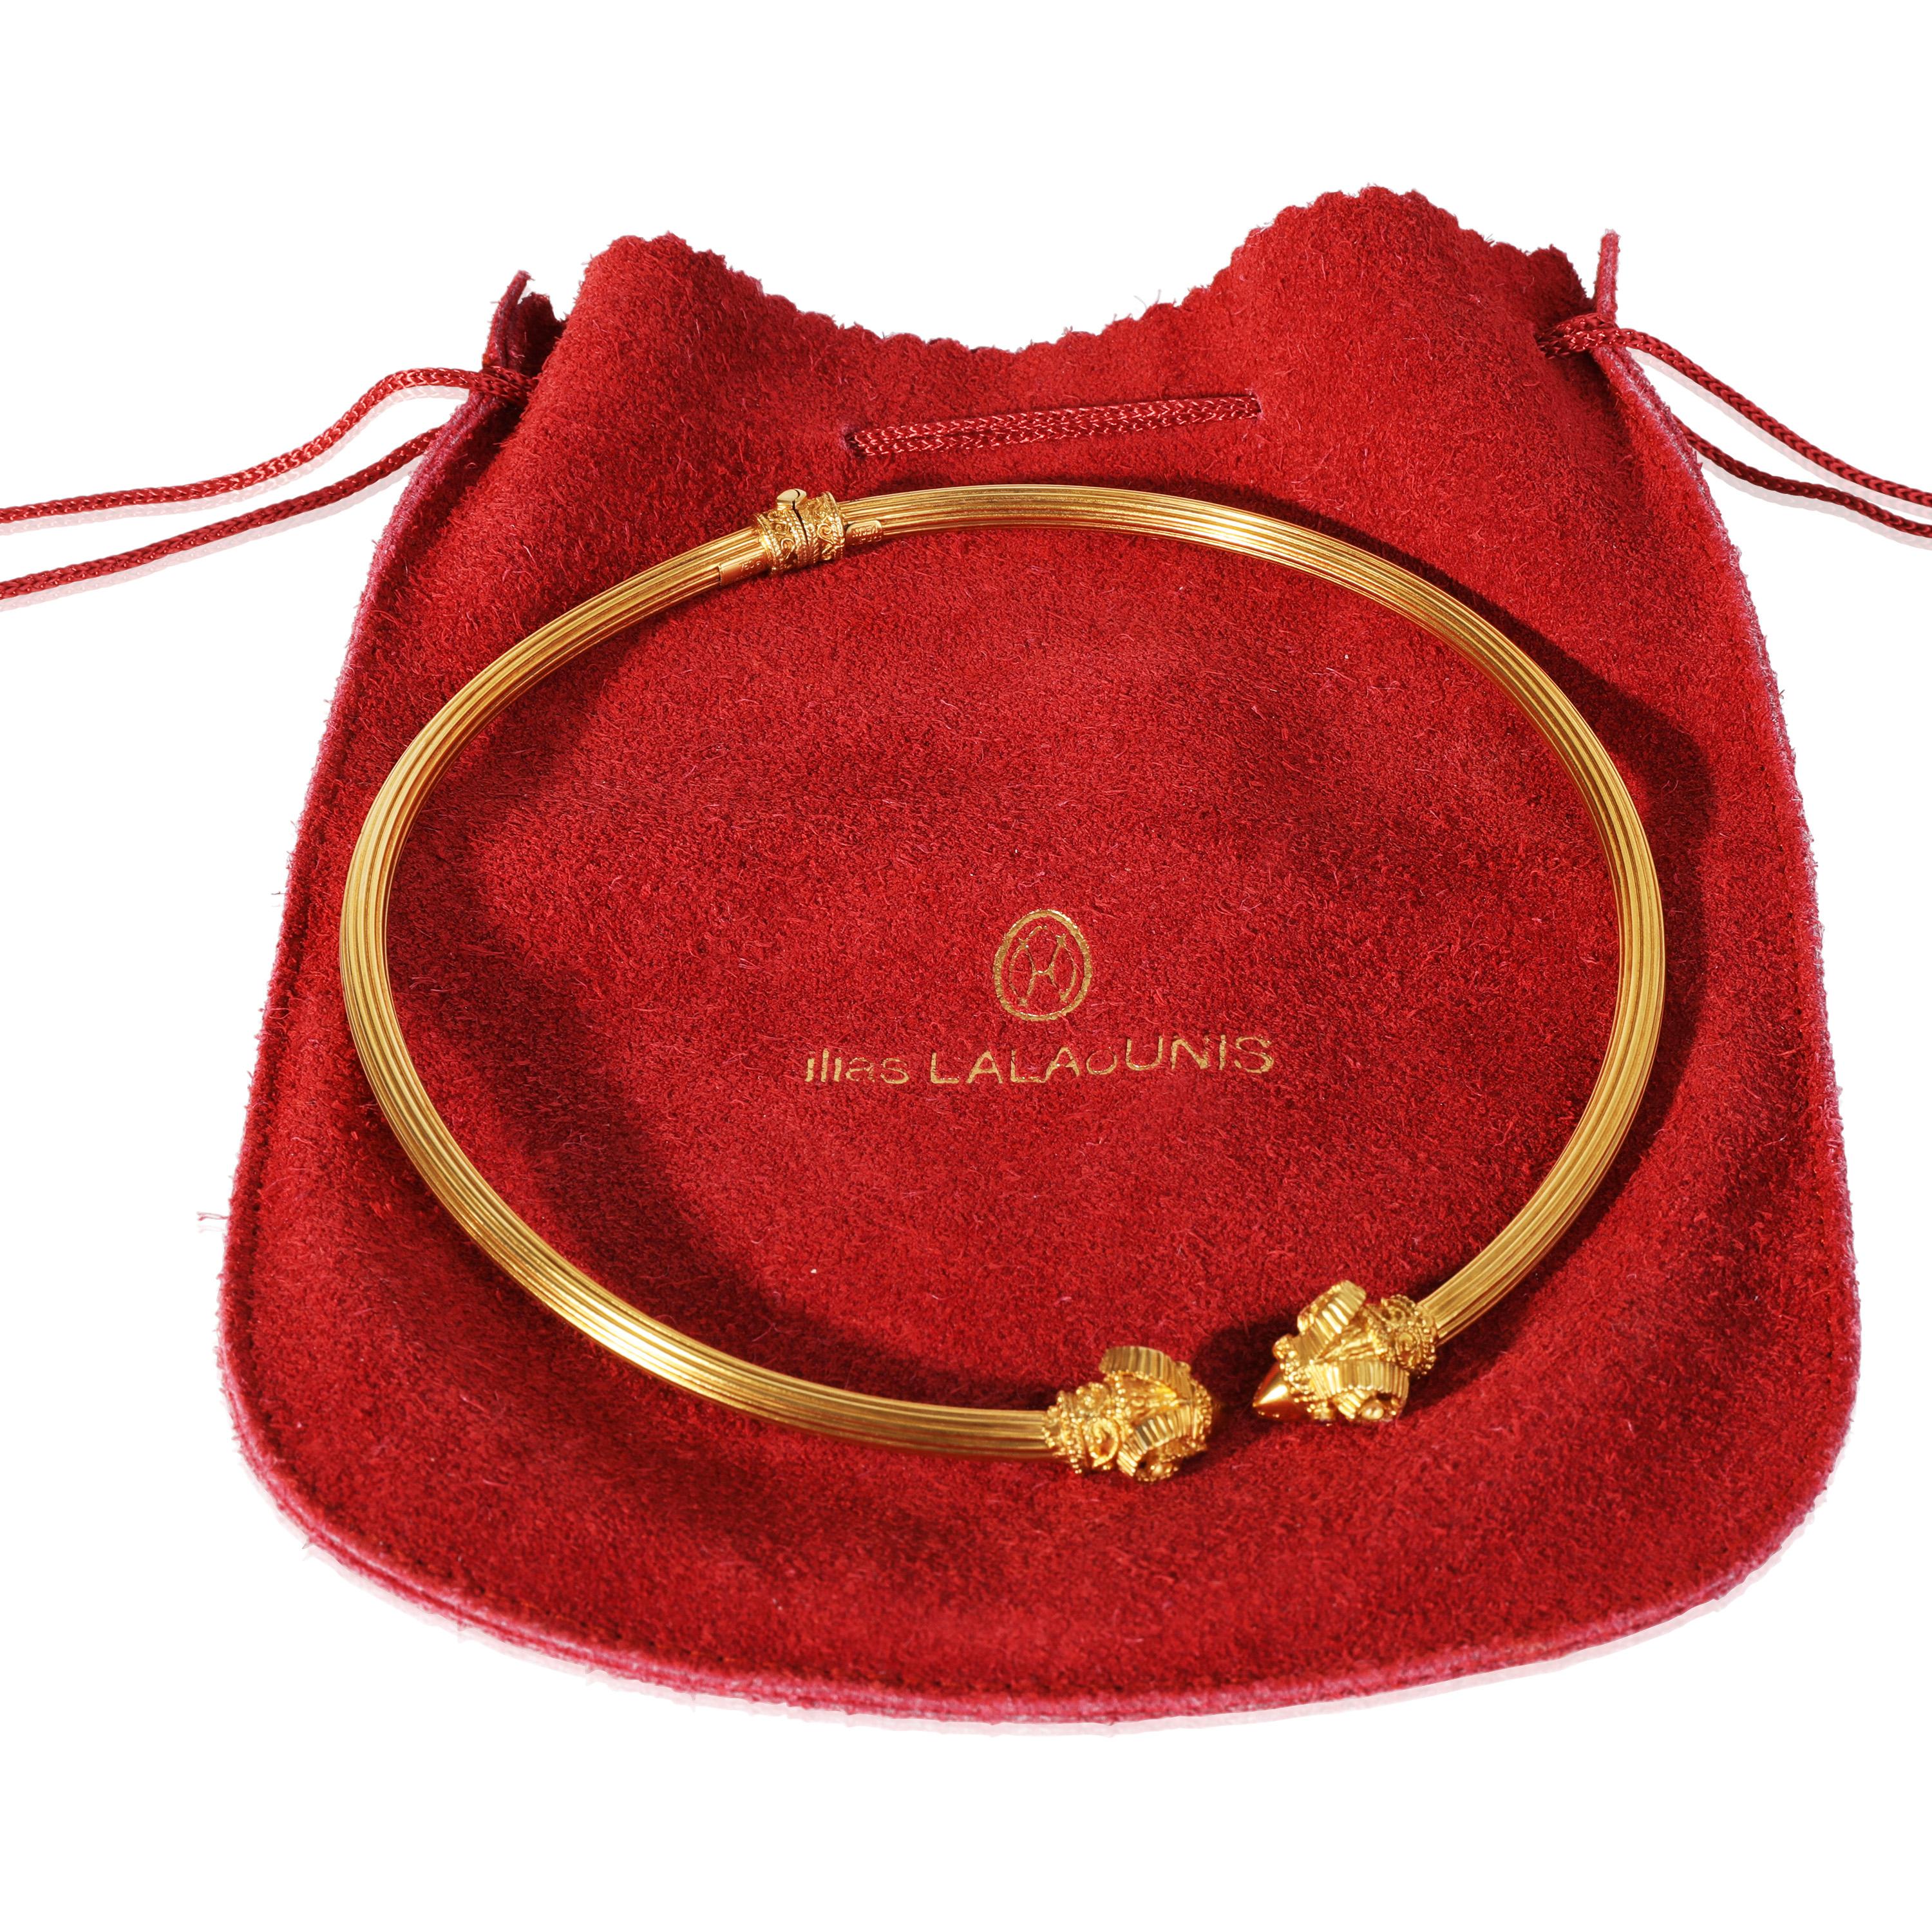 Illias Lalaounis Rams Head Collar Necklace With Ruby Eyes in 18K Yellow Gold

PRIMARY DETAILS
SKU: 120155
Listing Title: Illias Lalaounis Rams Head Collar Necklace With Ruby Eyes in 18K Yellow Gold
Condition Description: Retails for 9995 USD. In